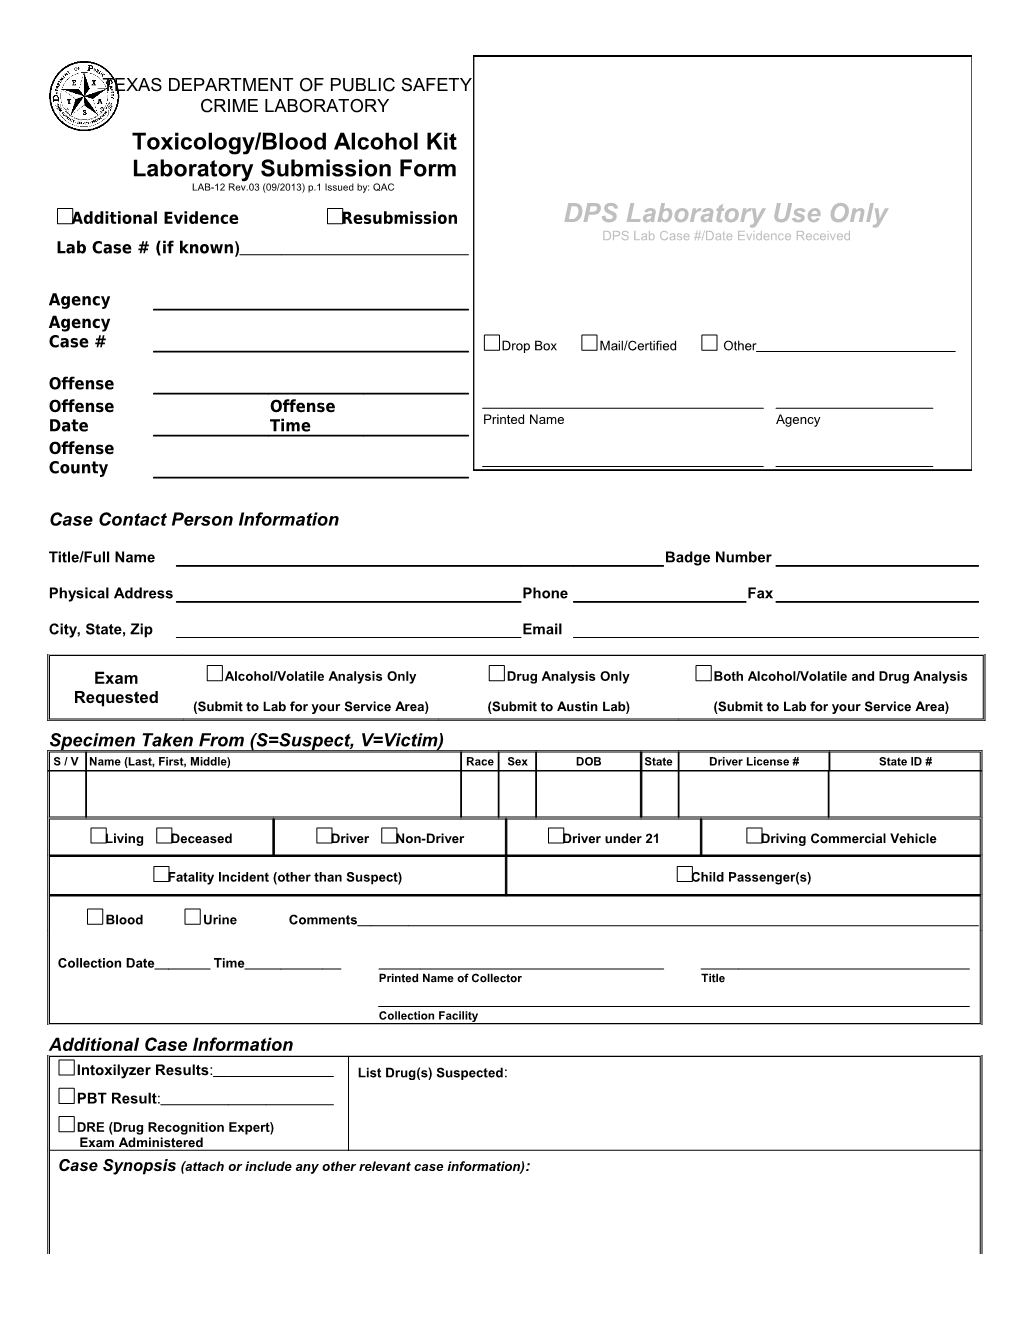 Toxicology/Blood Alcohol Kit Laboratory Submission Form